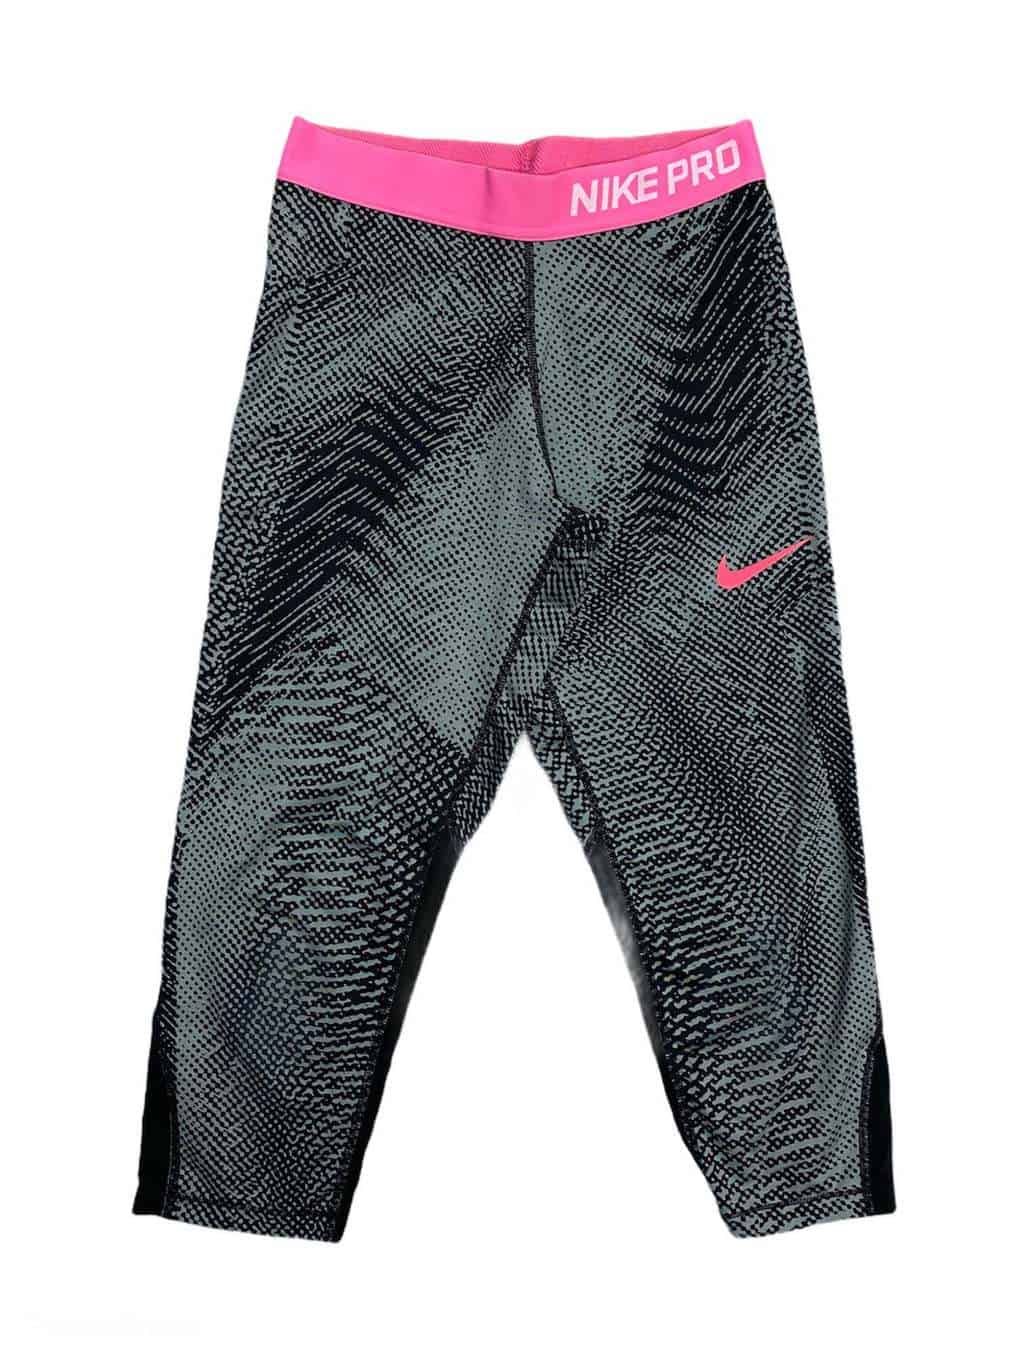 https://www.stcyrvintage.co.uk/wp-content/uploads/2021/07/womens-nike-pro-3-4-length-leggings-with-pink-waistband-and-abstract-grey-and-black-motif-size-xs-s-60f06d12.jpg